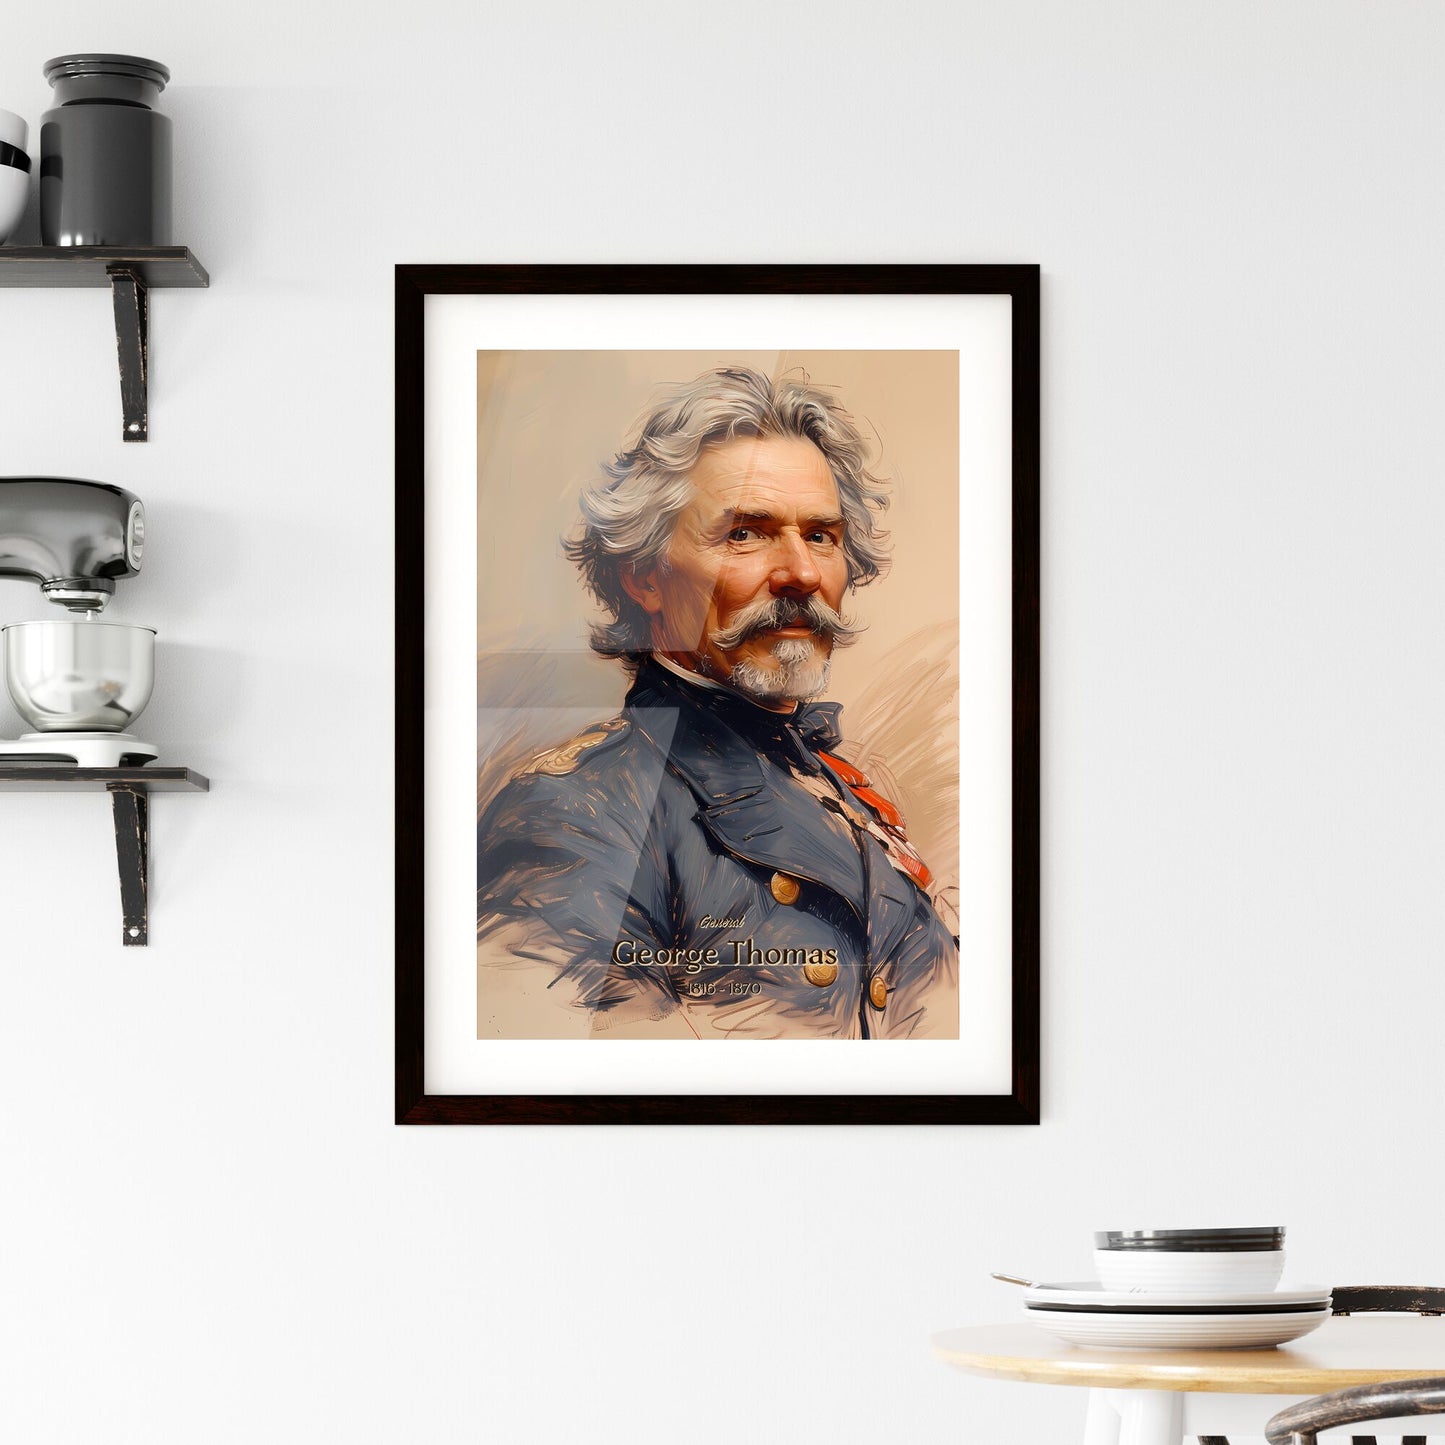 General, George Thomas, 1816 - 1870, A Poster of a man in a military uniform Default Title